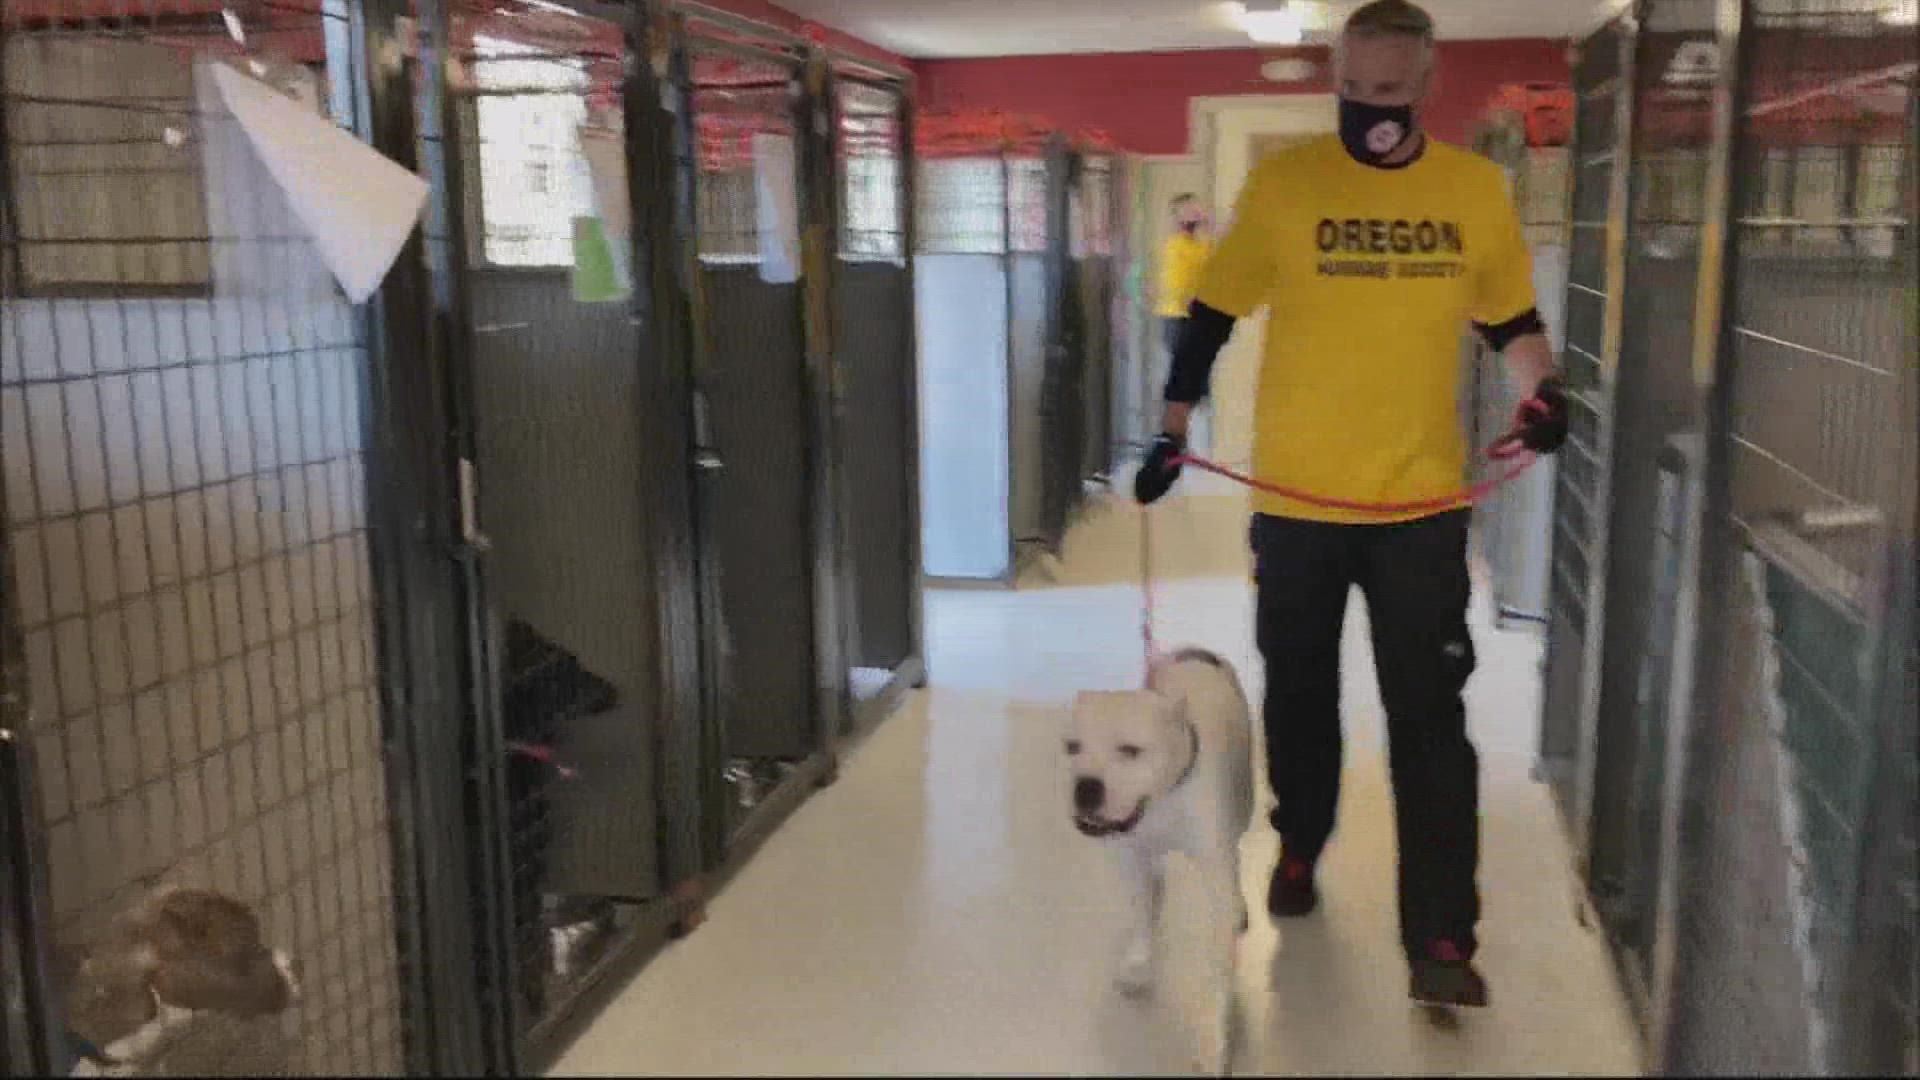 The humane society's disaster response team is in Tennessee helping dogs that had to be evacuated from shelters in Louisiana. KGW's Mike Benner reports.